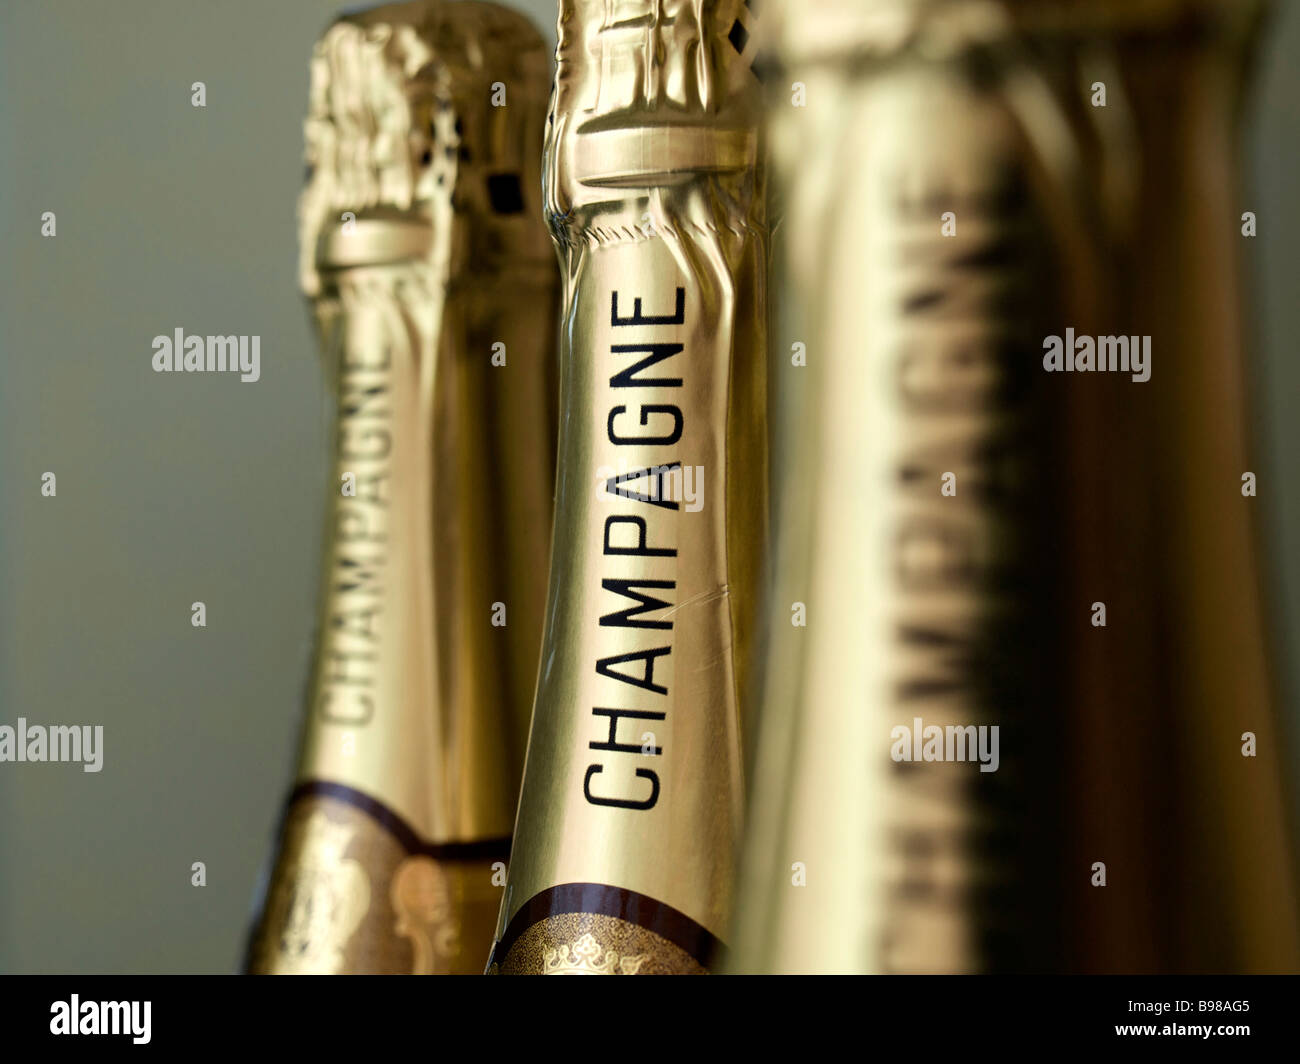 Bottles of French champagne Stock Photo